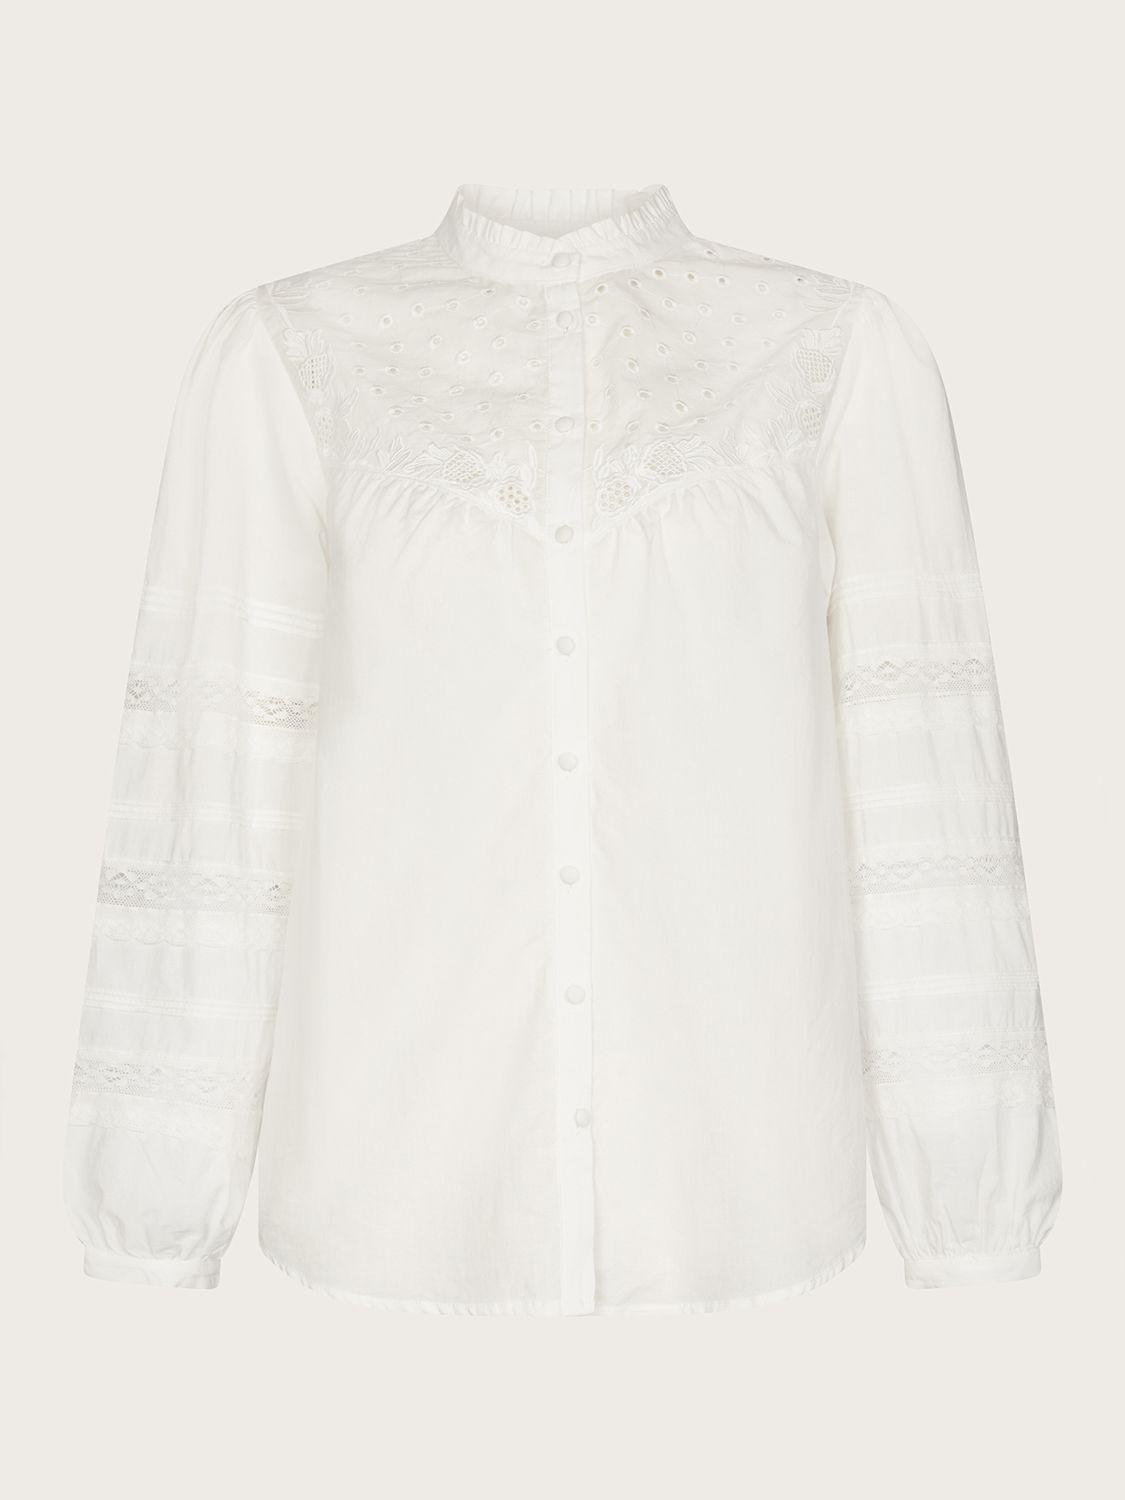 Monsoon Bronwyn Broderie Blouse, White at John Lewis & Partners